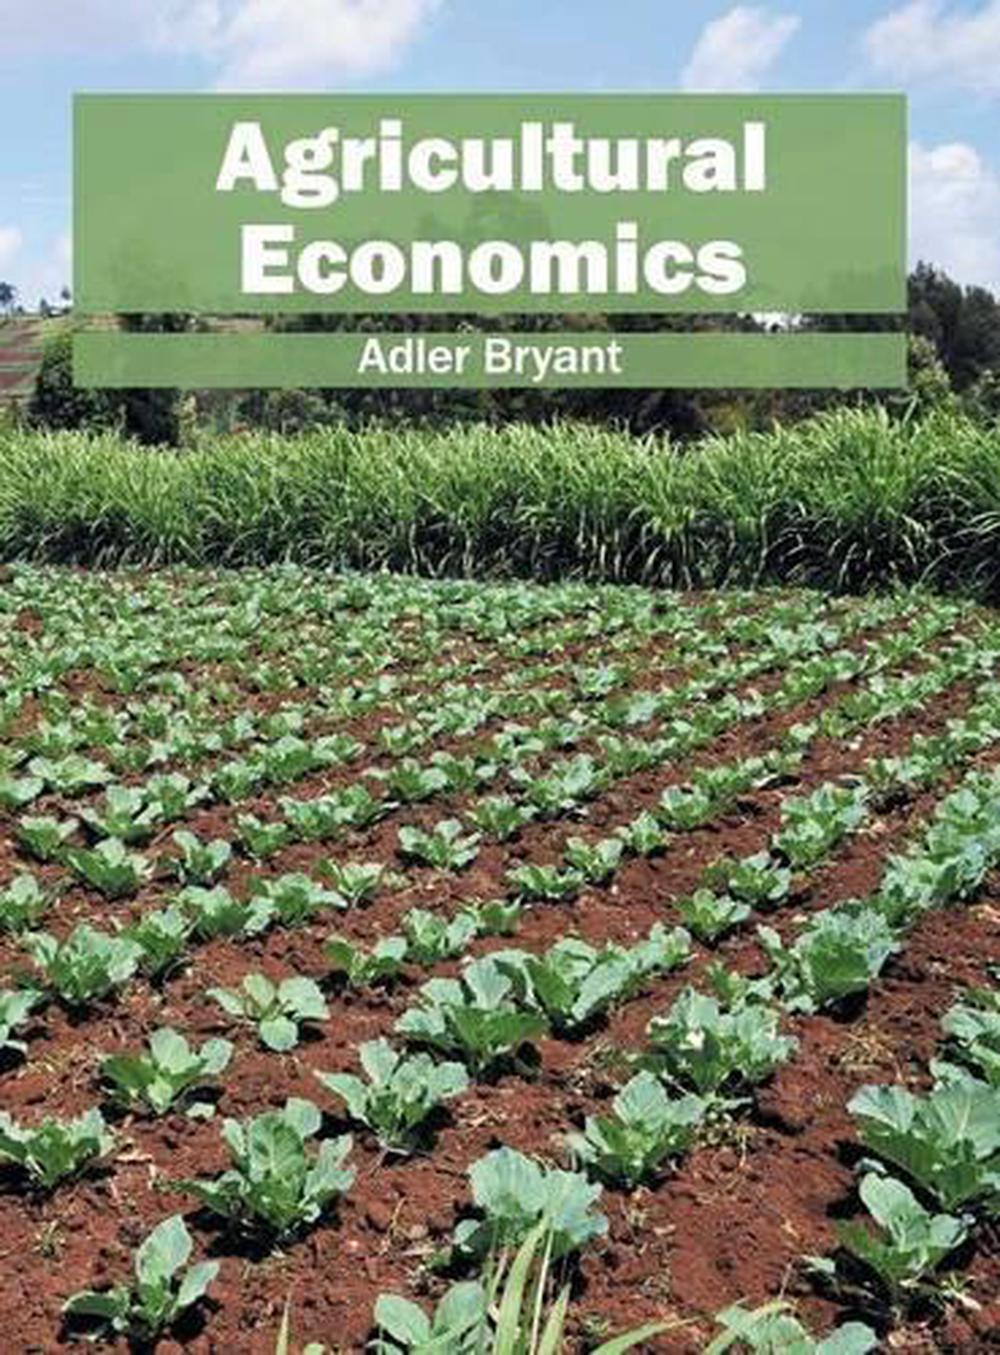 research areas in agricultural economics